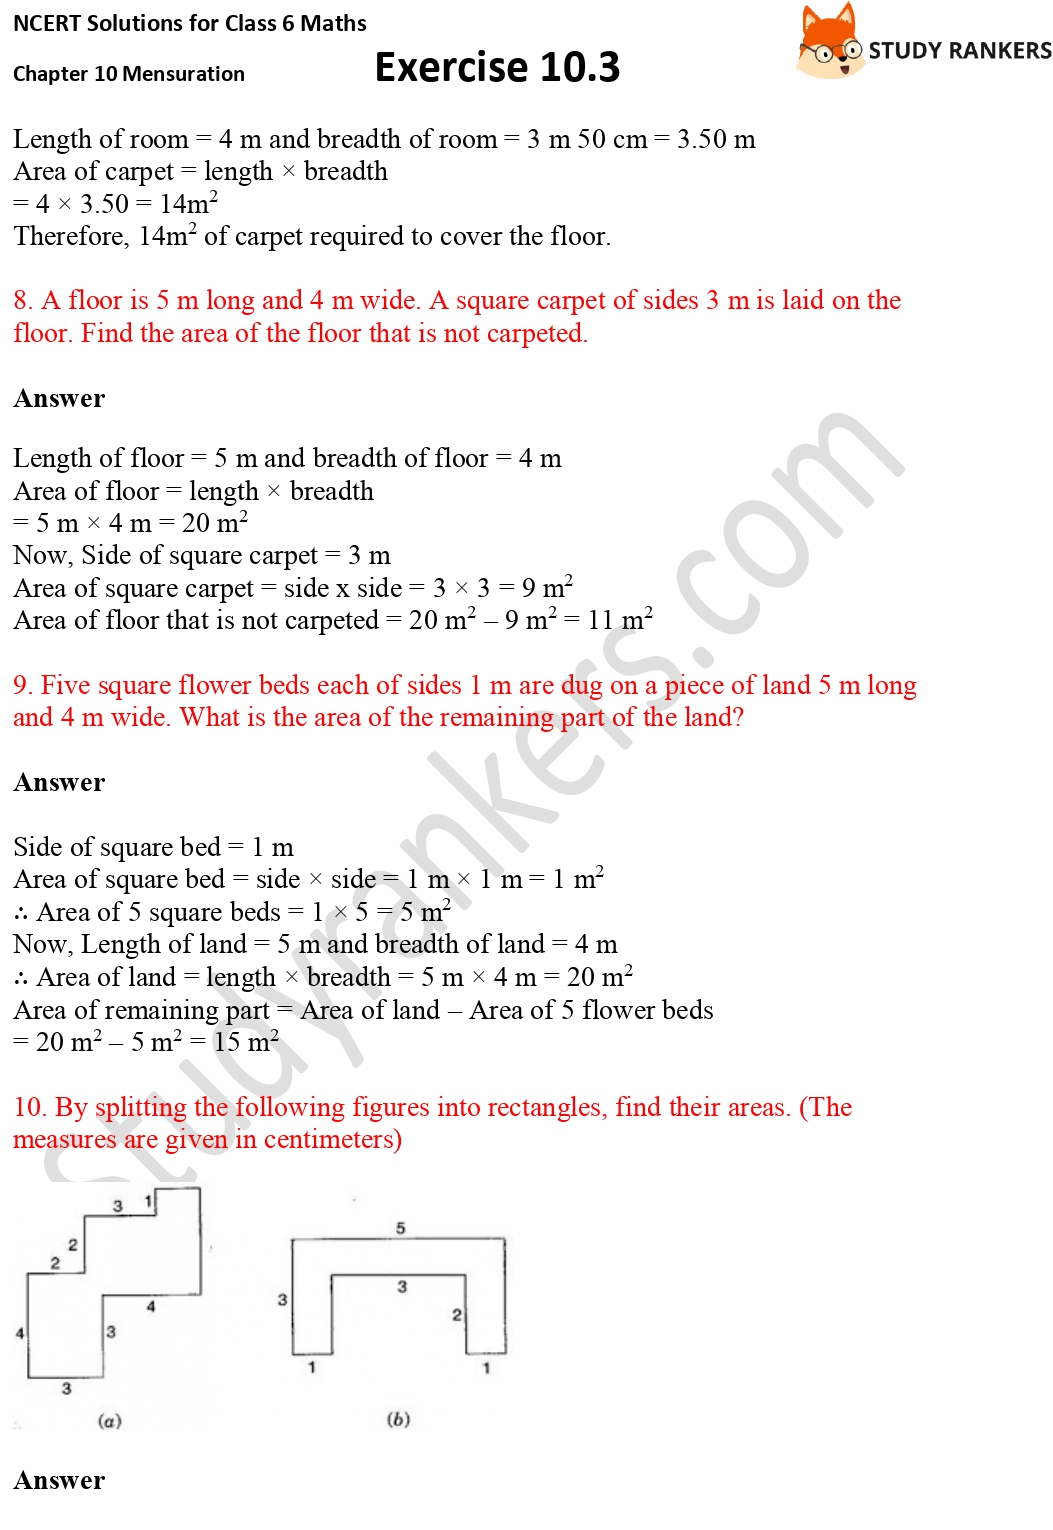 NCERT Solutions for Class 6 Maths Chapter 10 Mensuration Exercise 10.3 Part 3